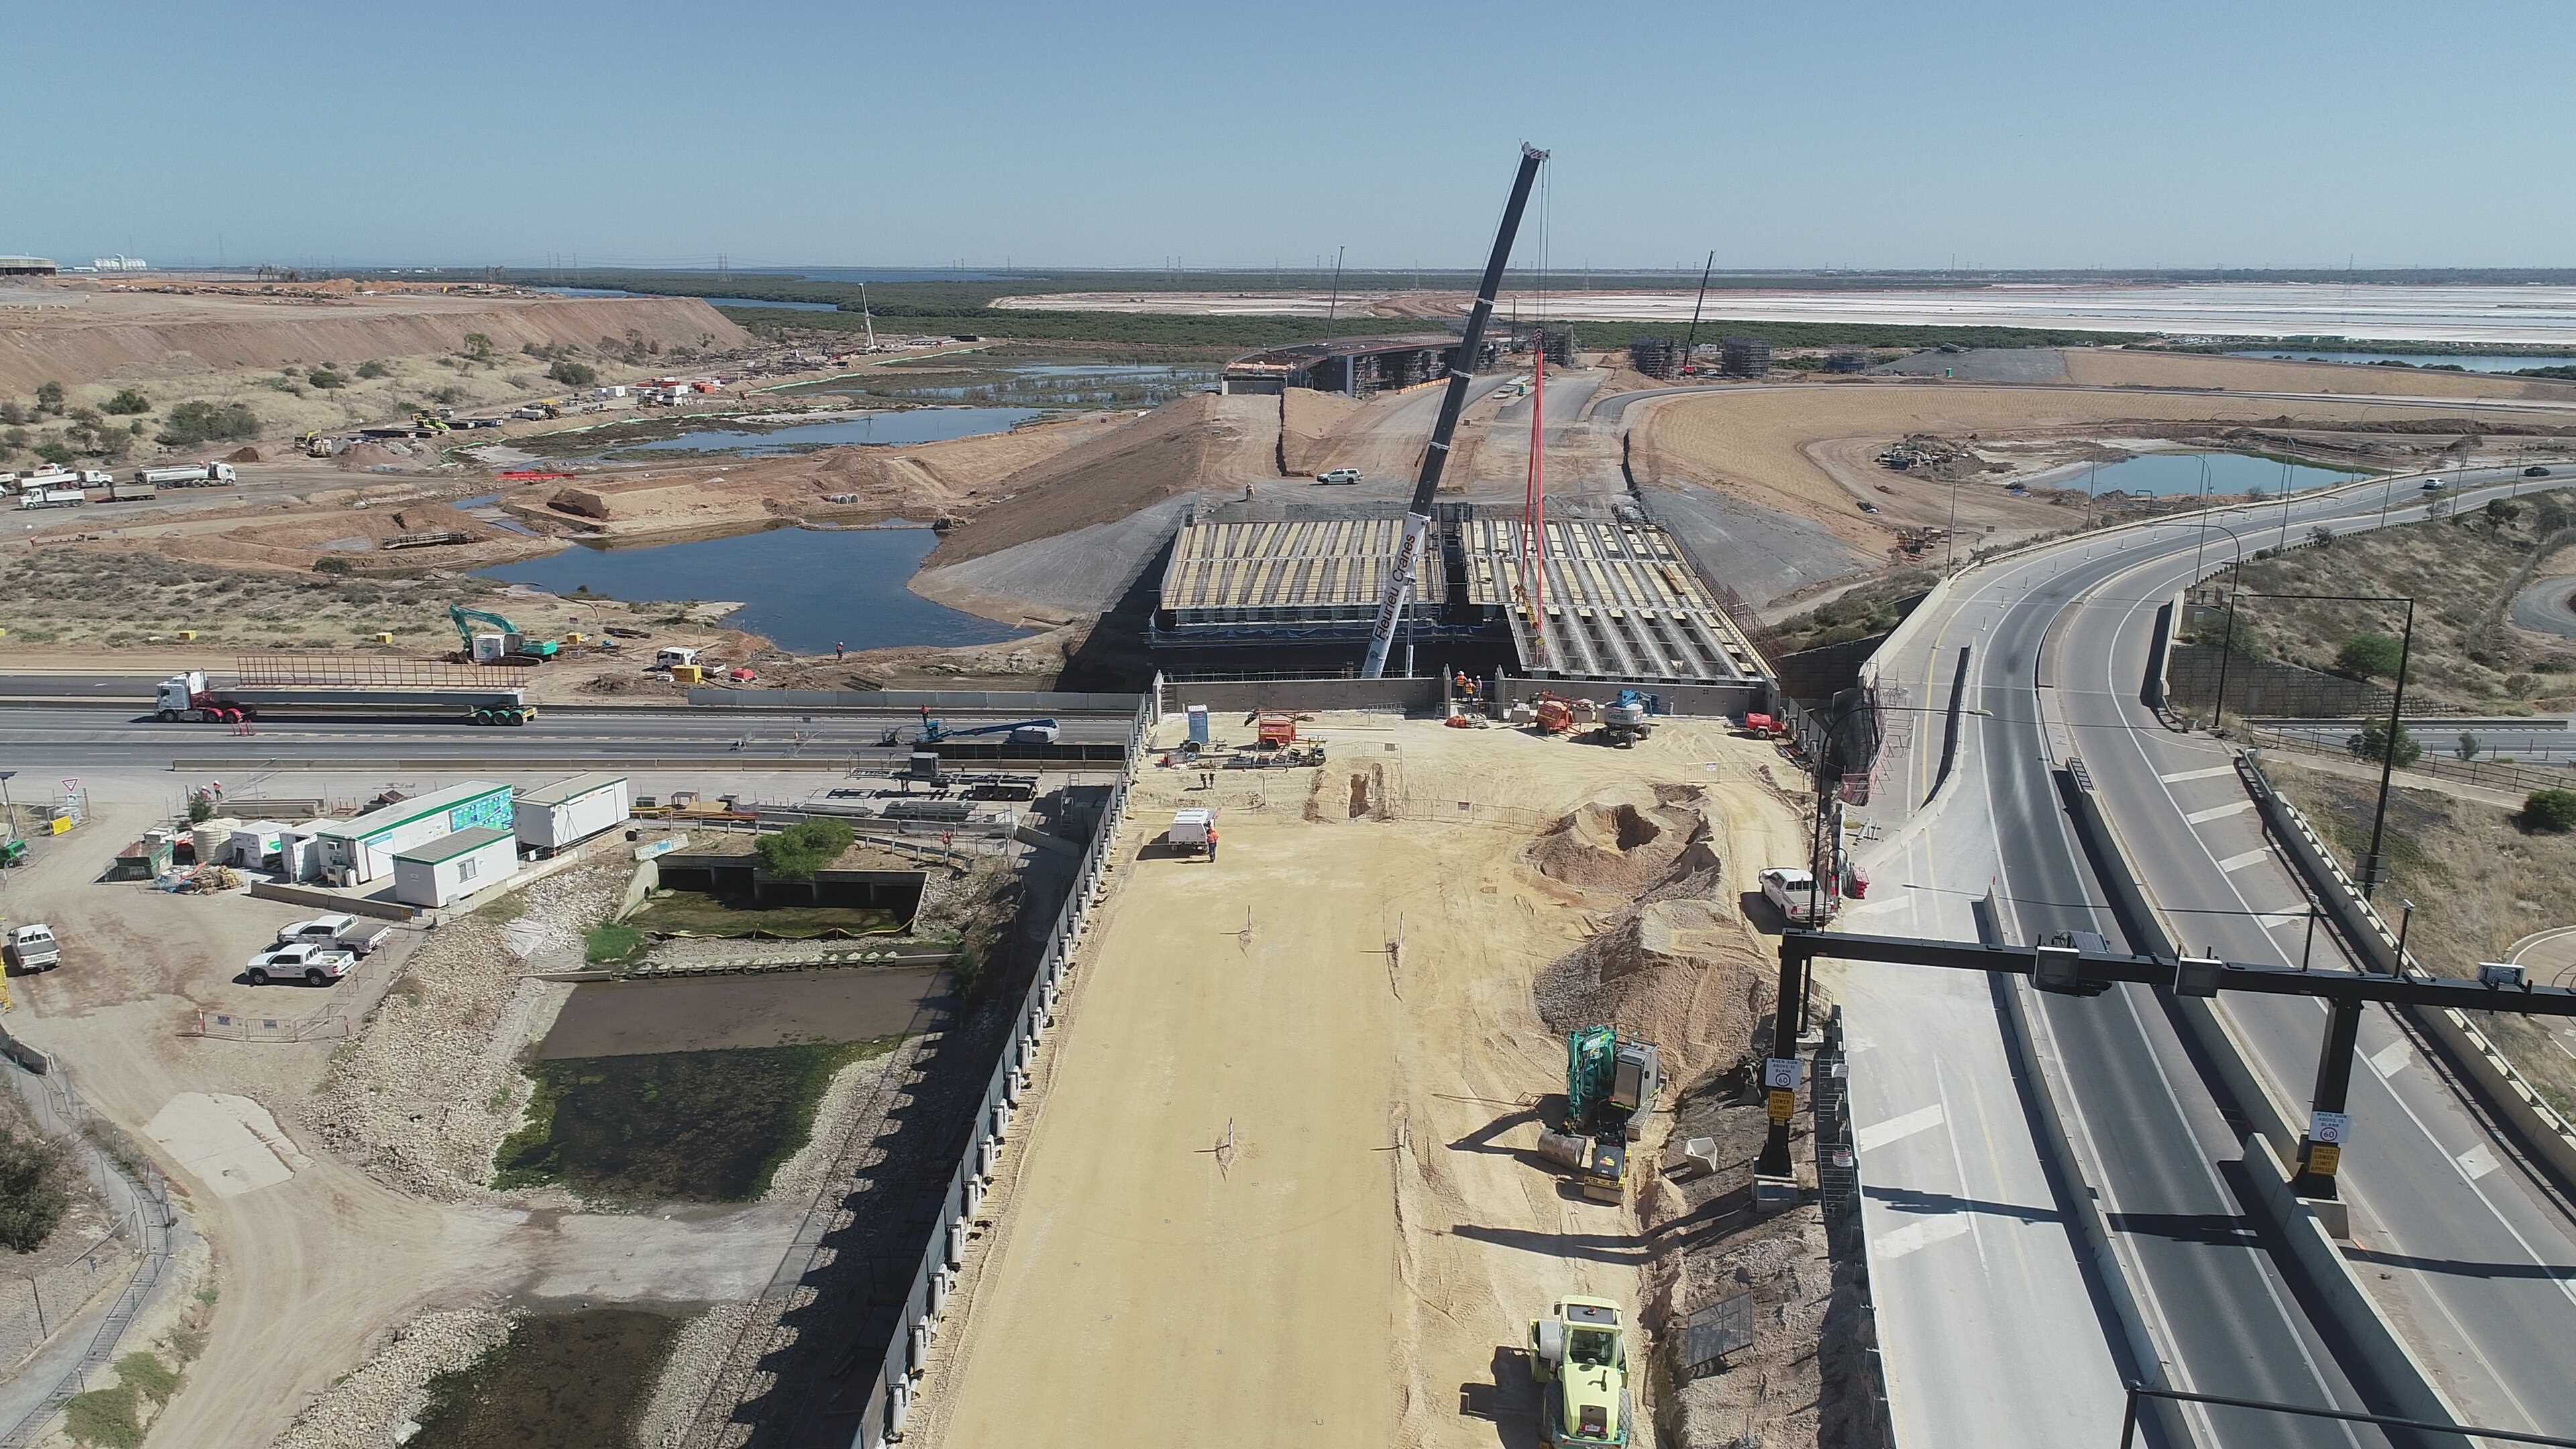 Bridge beam lift over the Port River Expressway (looking north) - January 2019